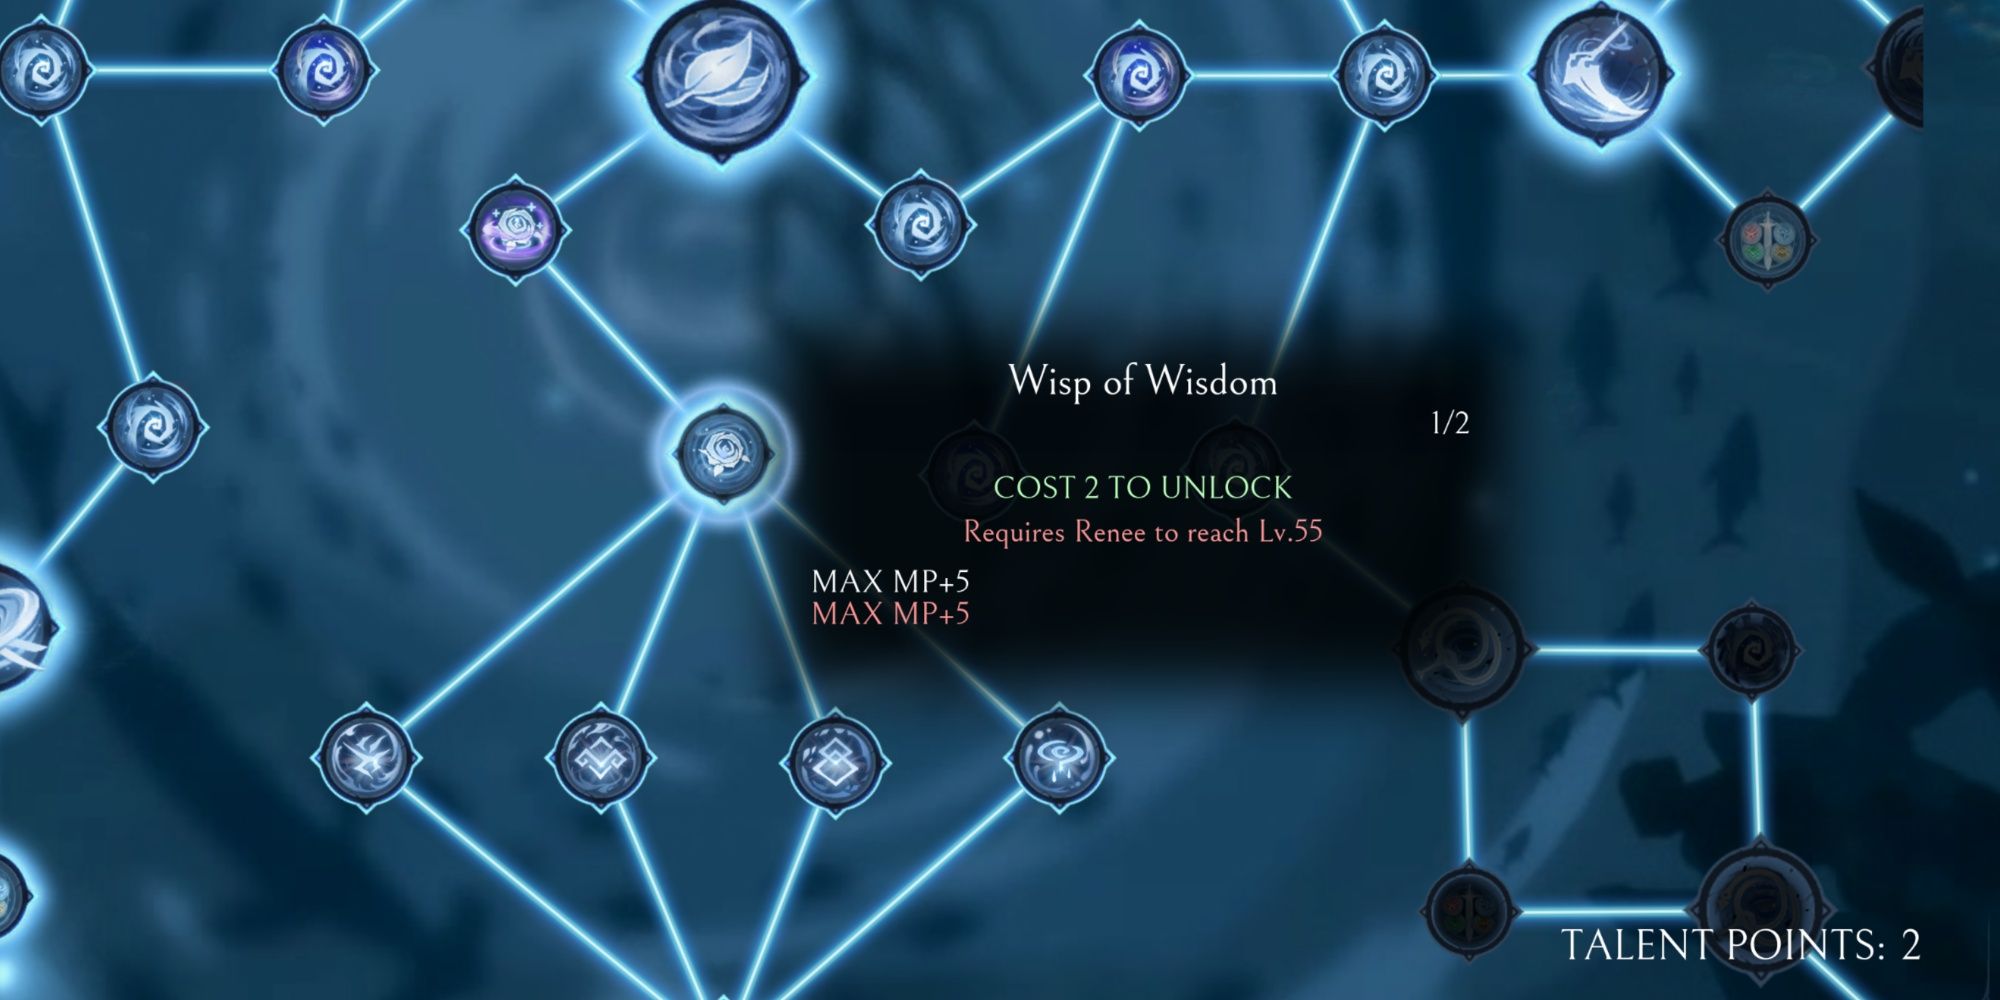 The Wisp of Wisdom Talent in Afterimage, showcasing its ability to drastically increase your Max MP